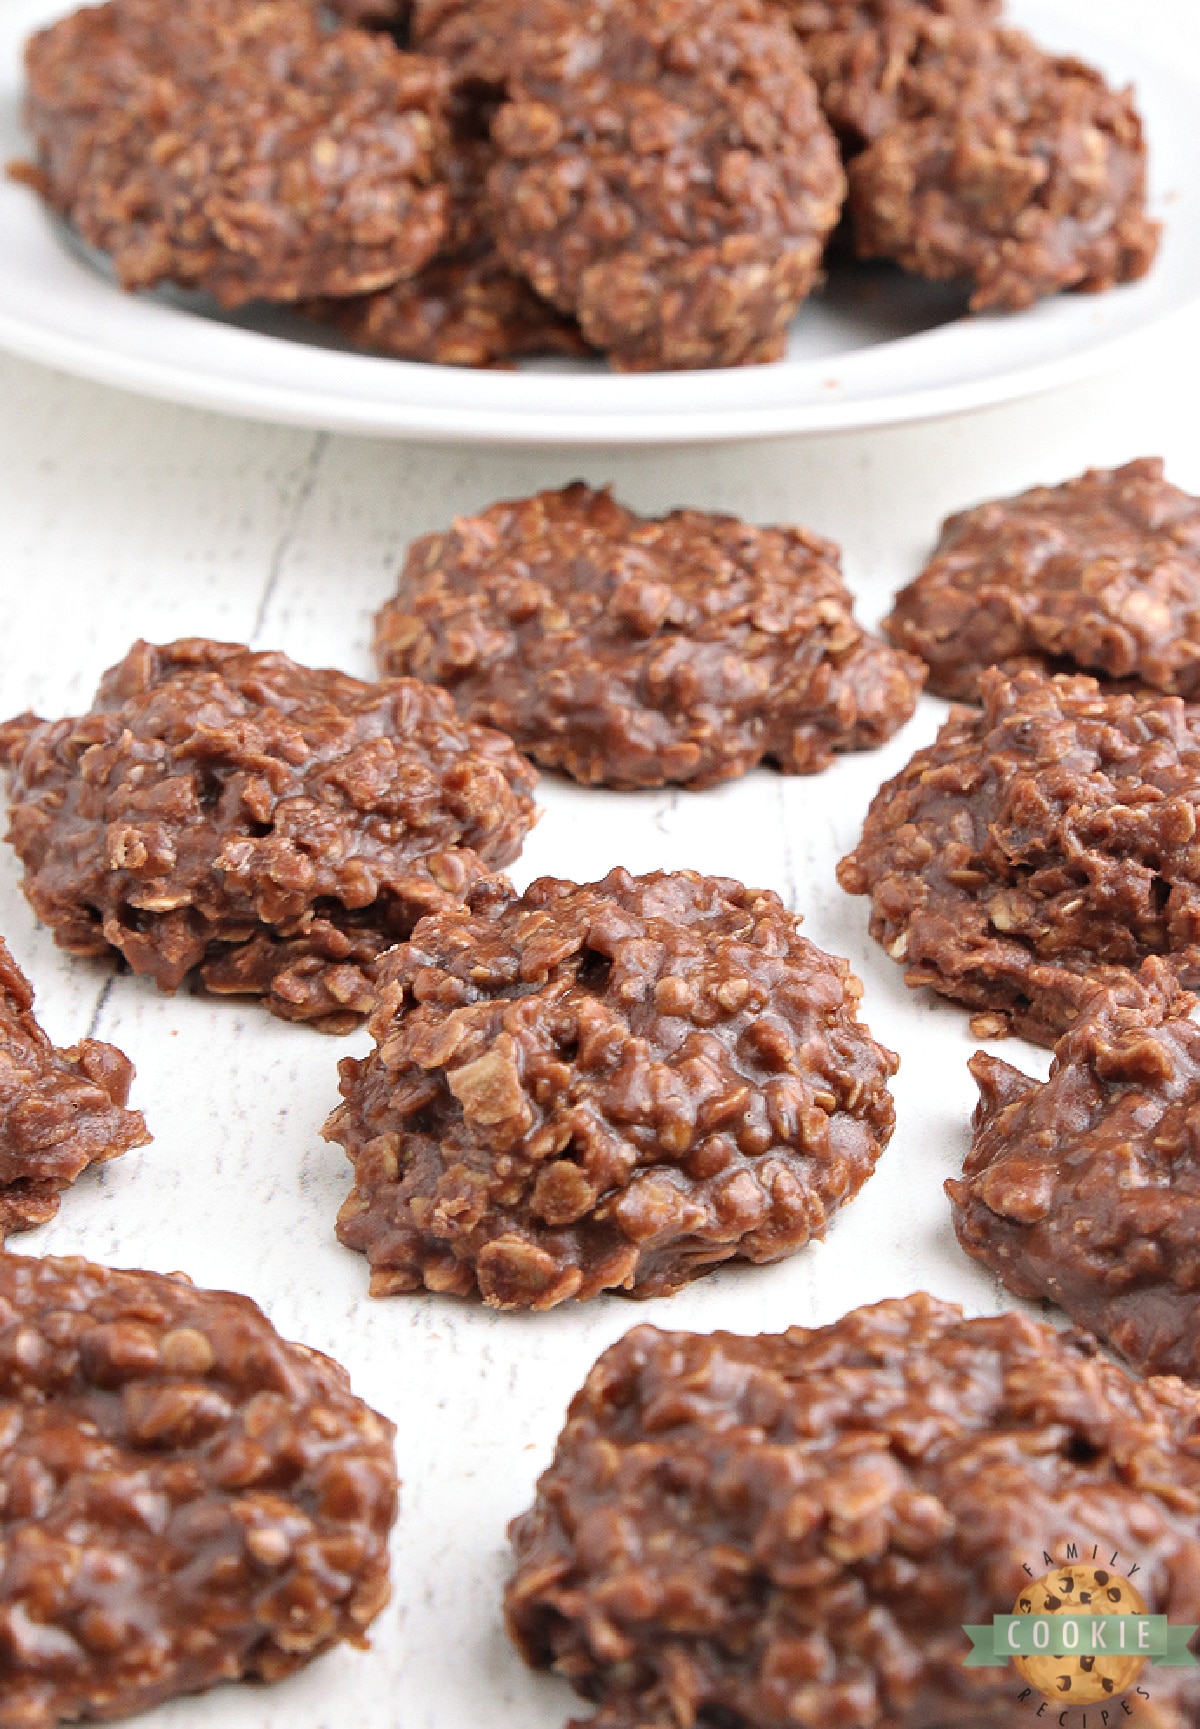 Nutella No Bake Cookies are just like traditional no bake cookies, but with Nutella instead of peanut butter. Made 